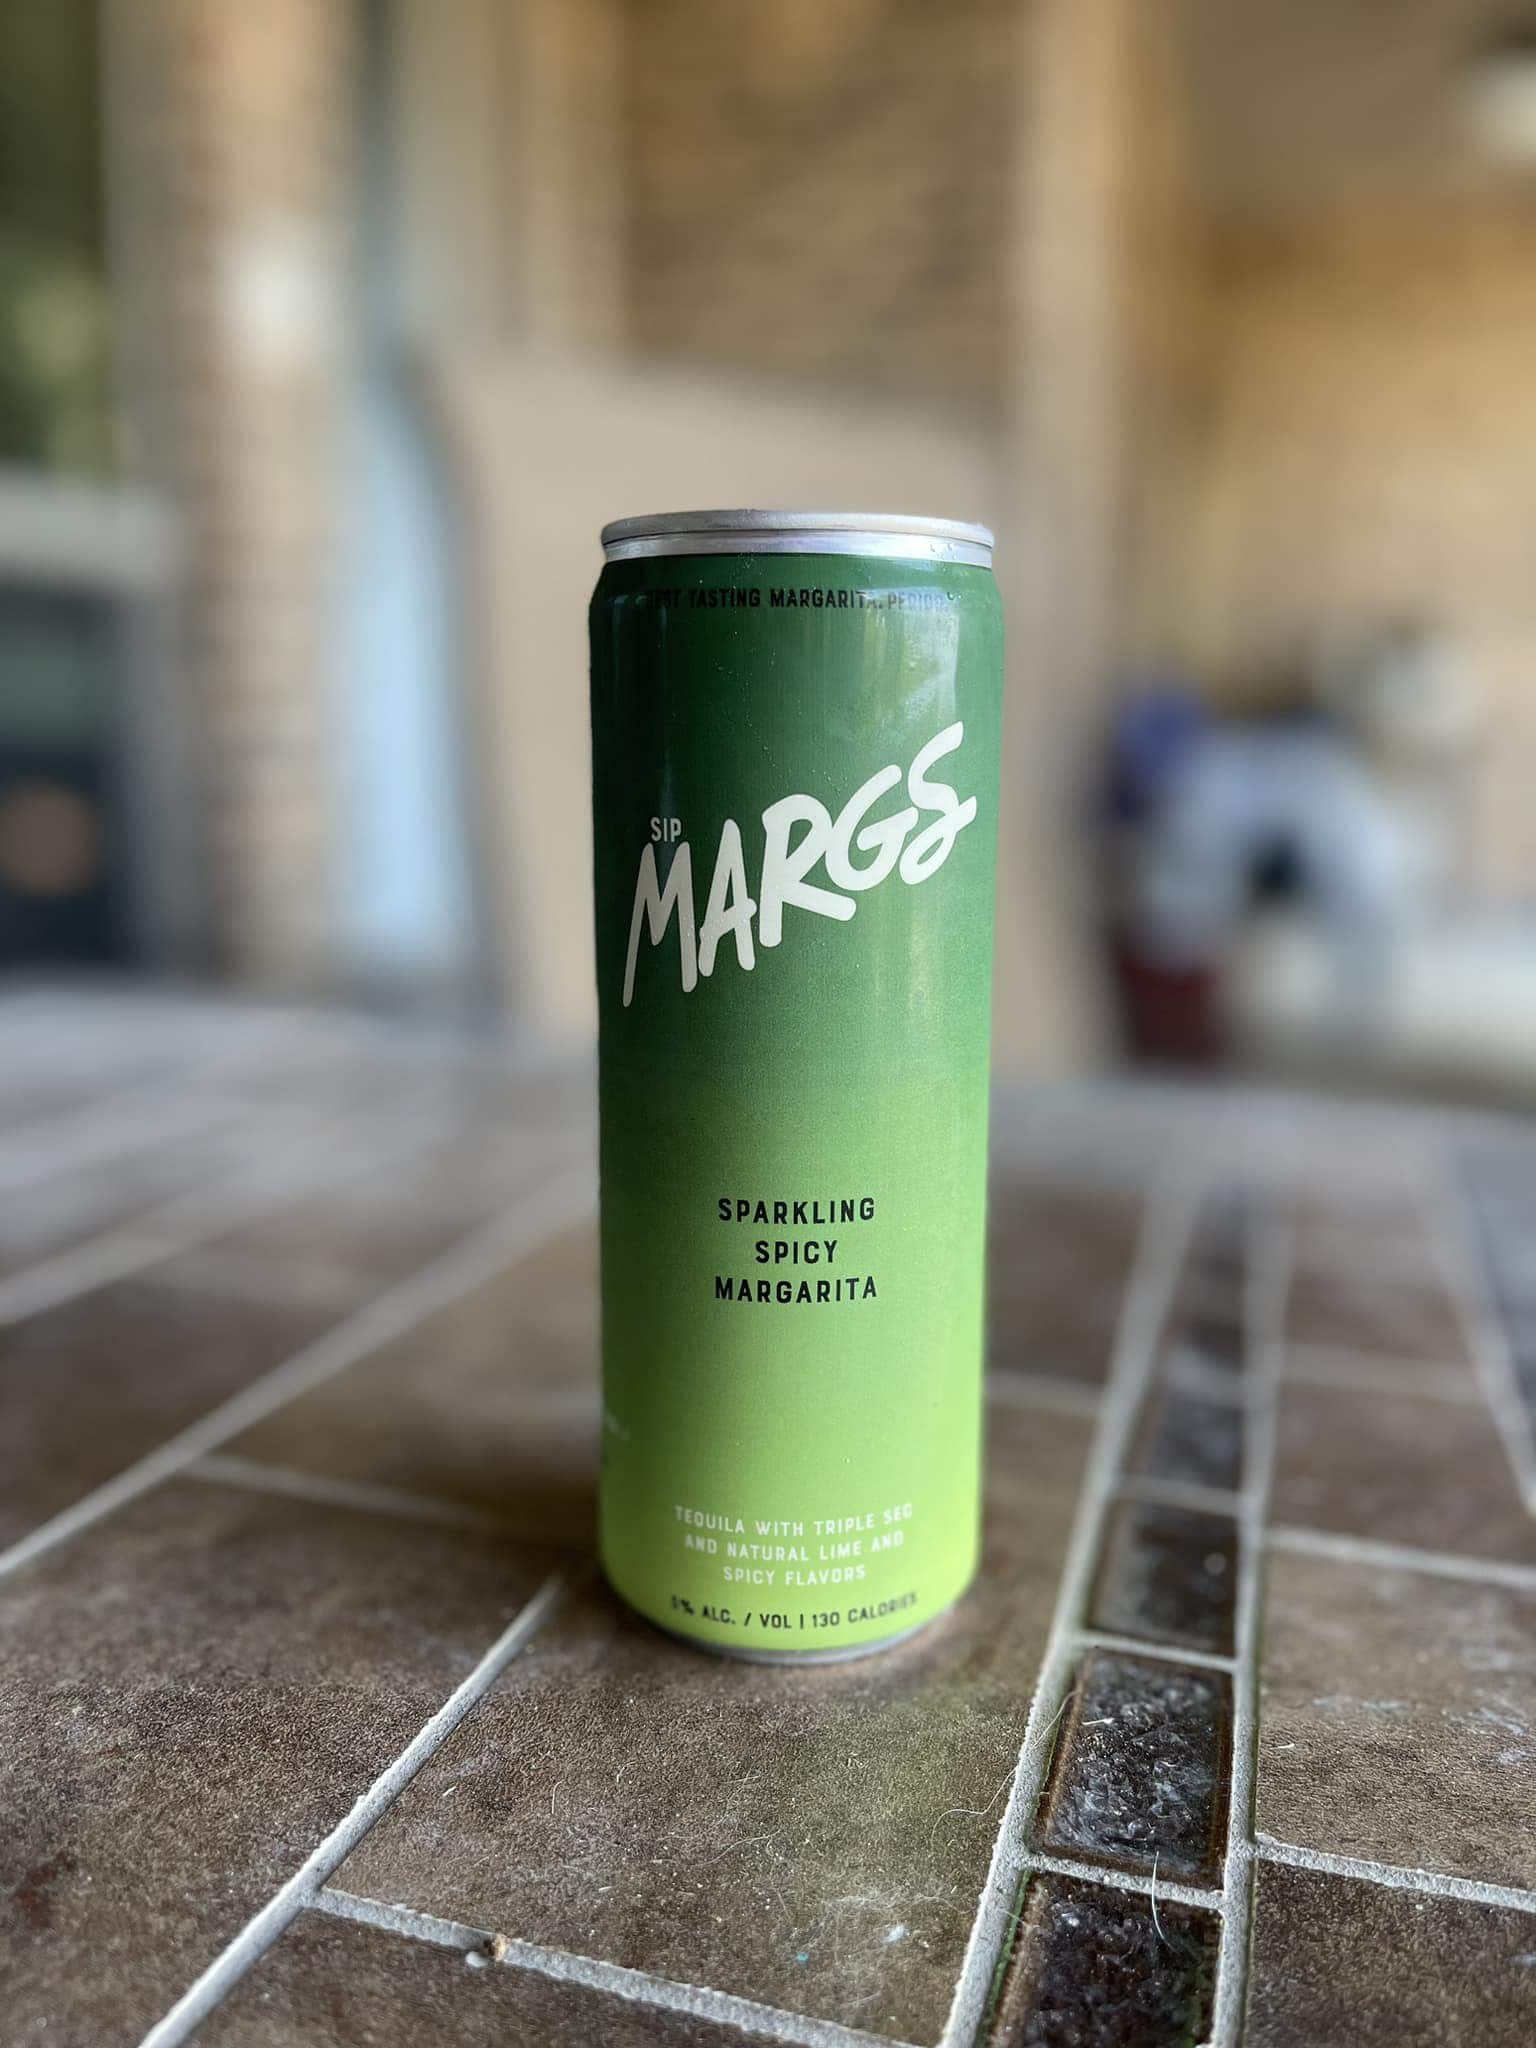 Green can of Margs spicy sparkling margarita